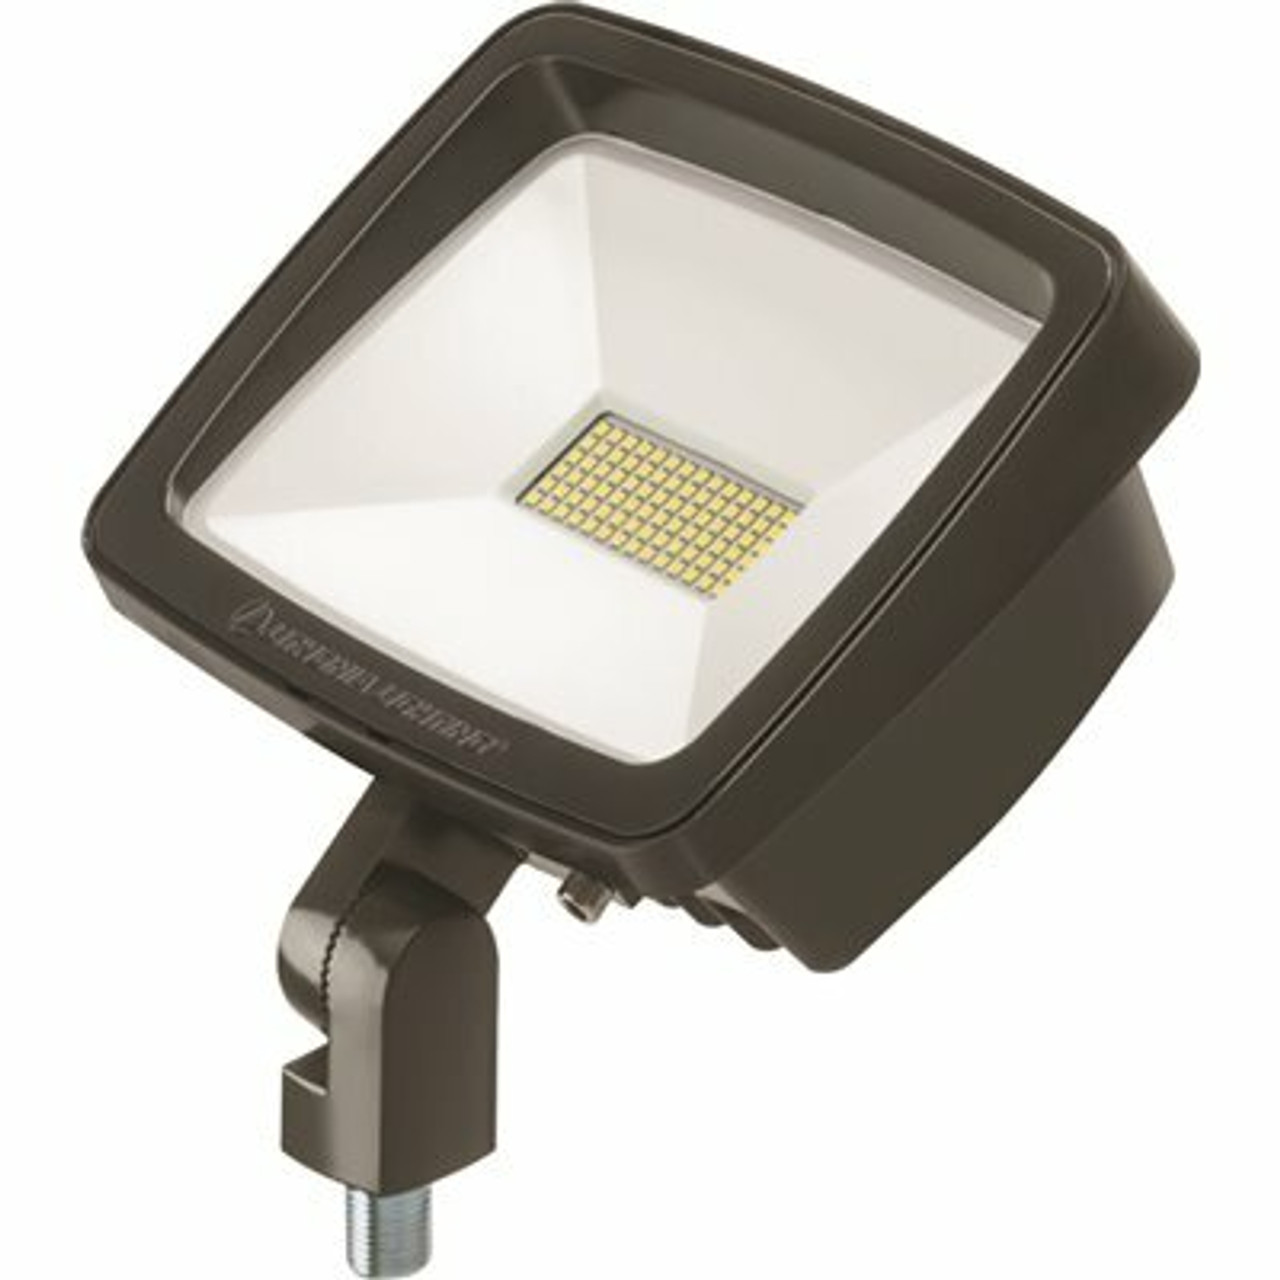 Lithonia Lighting Contractor Select Tfx1 54-Watt White Knuckle Mount Outdoor Integrated Led Flood Light